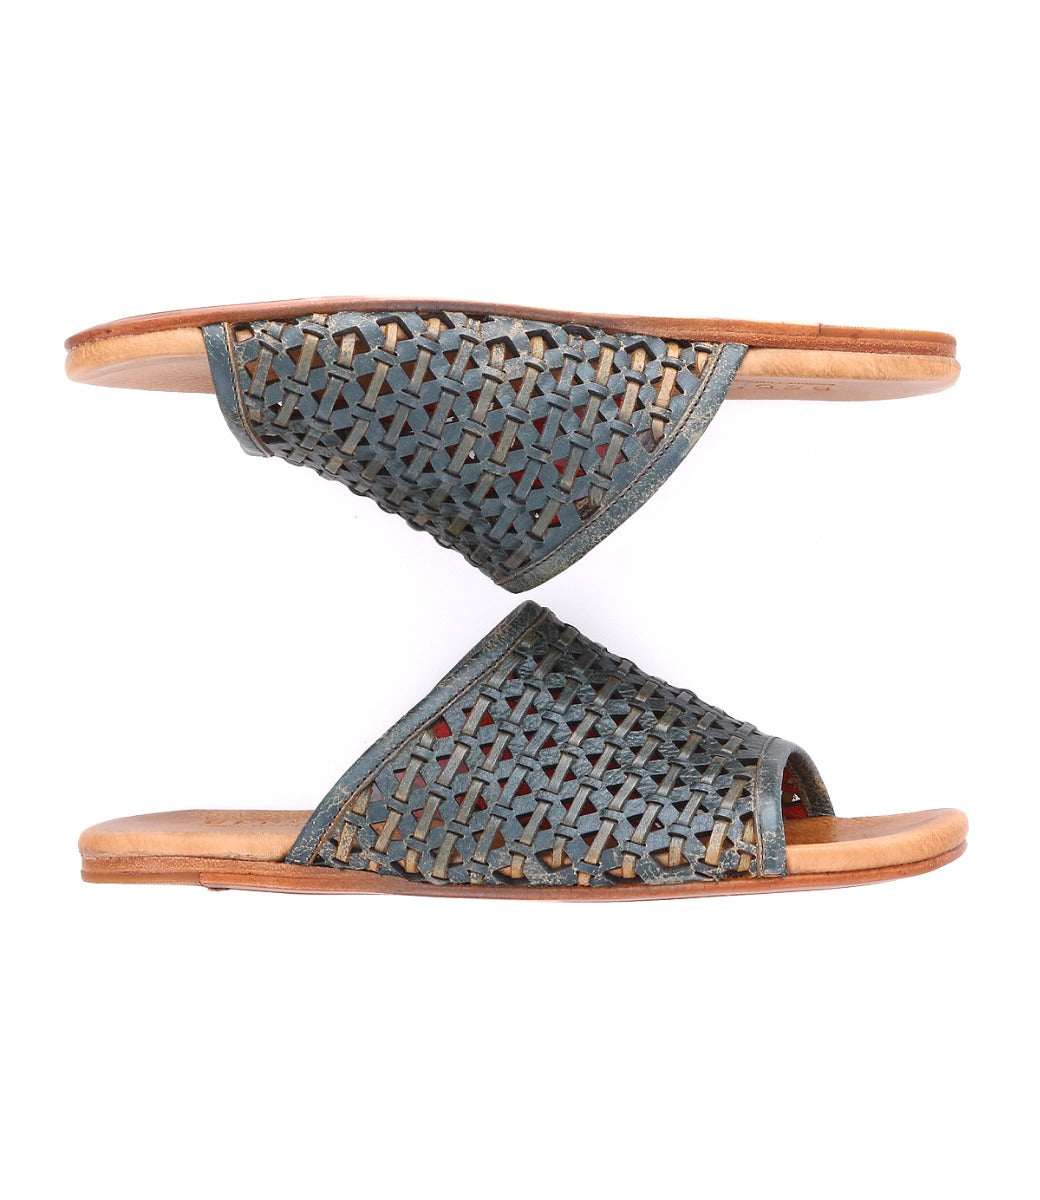 A pair of Minerva blue leather sandals with a woven pattern from the brand Bed Stu.